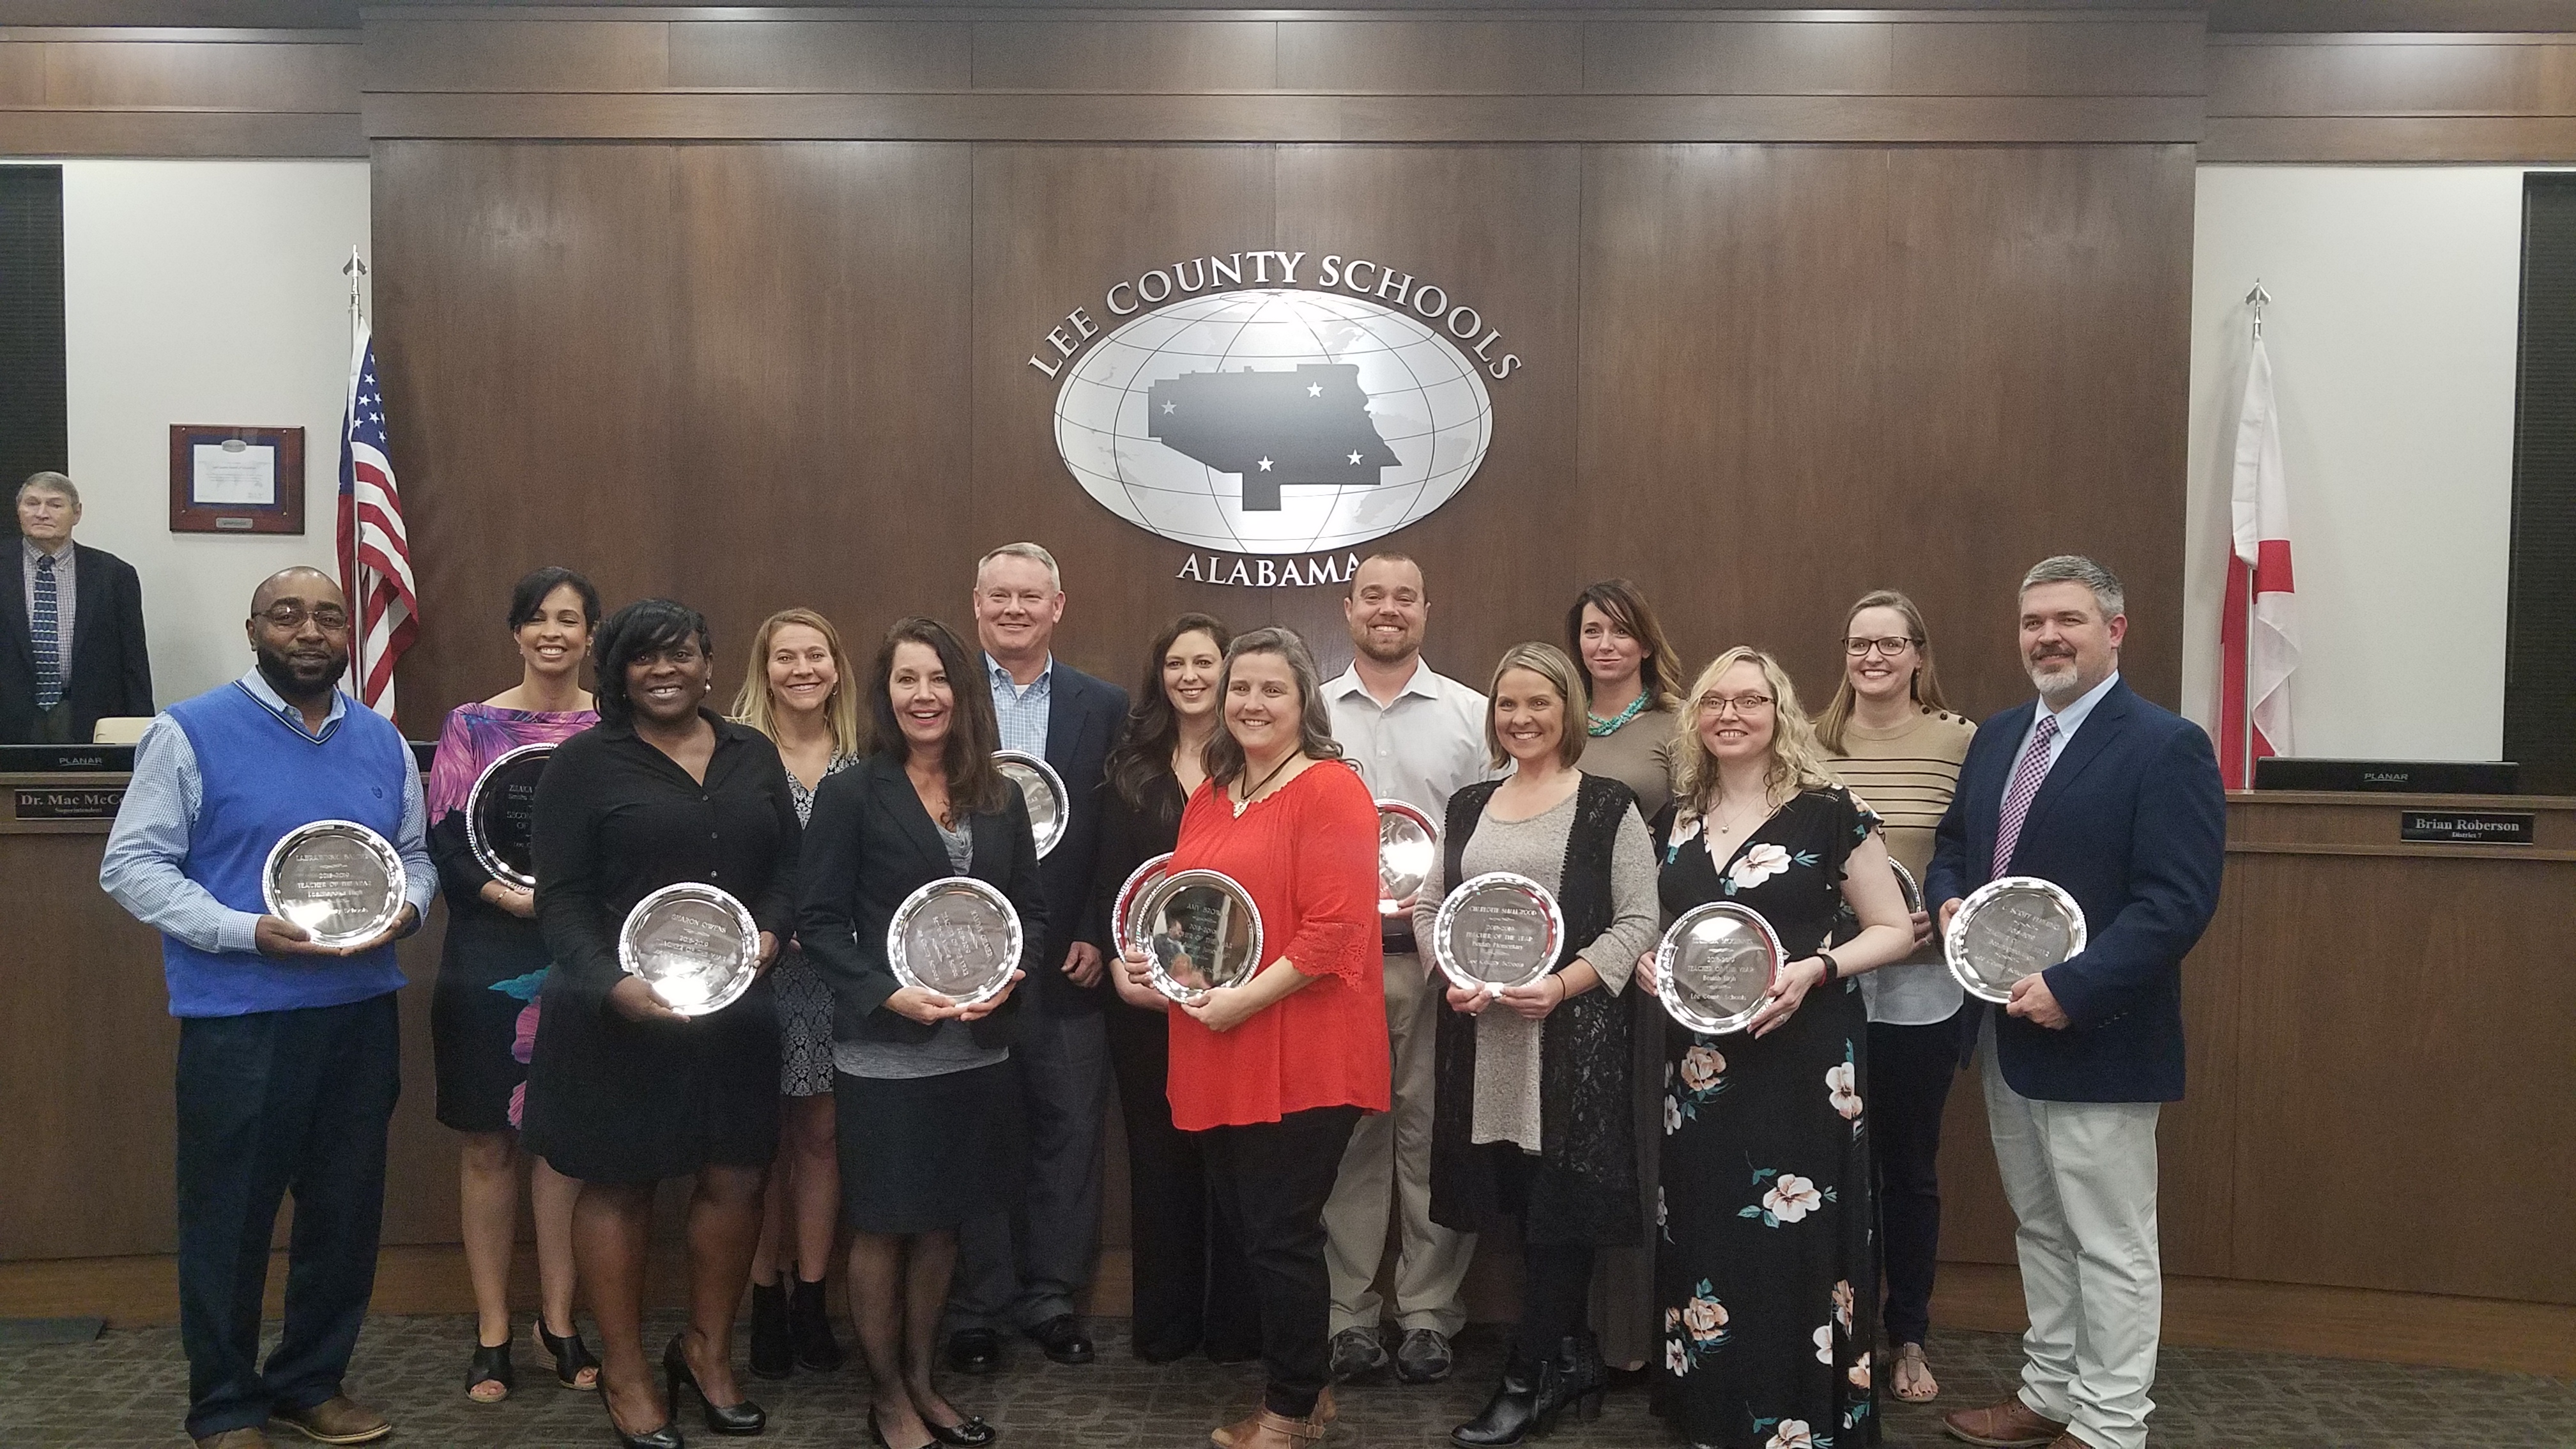 Lee County School Board recognizes 2018-19 ‘Teachers of the Year’